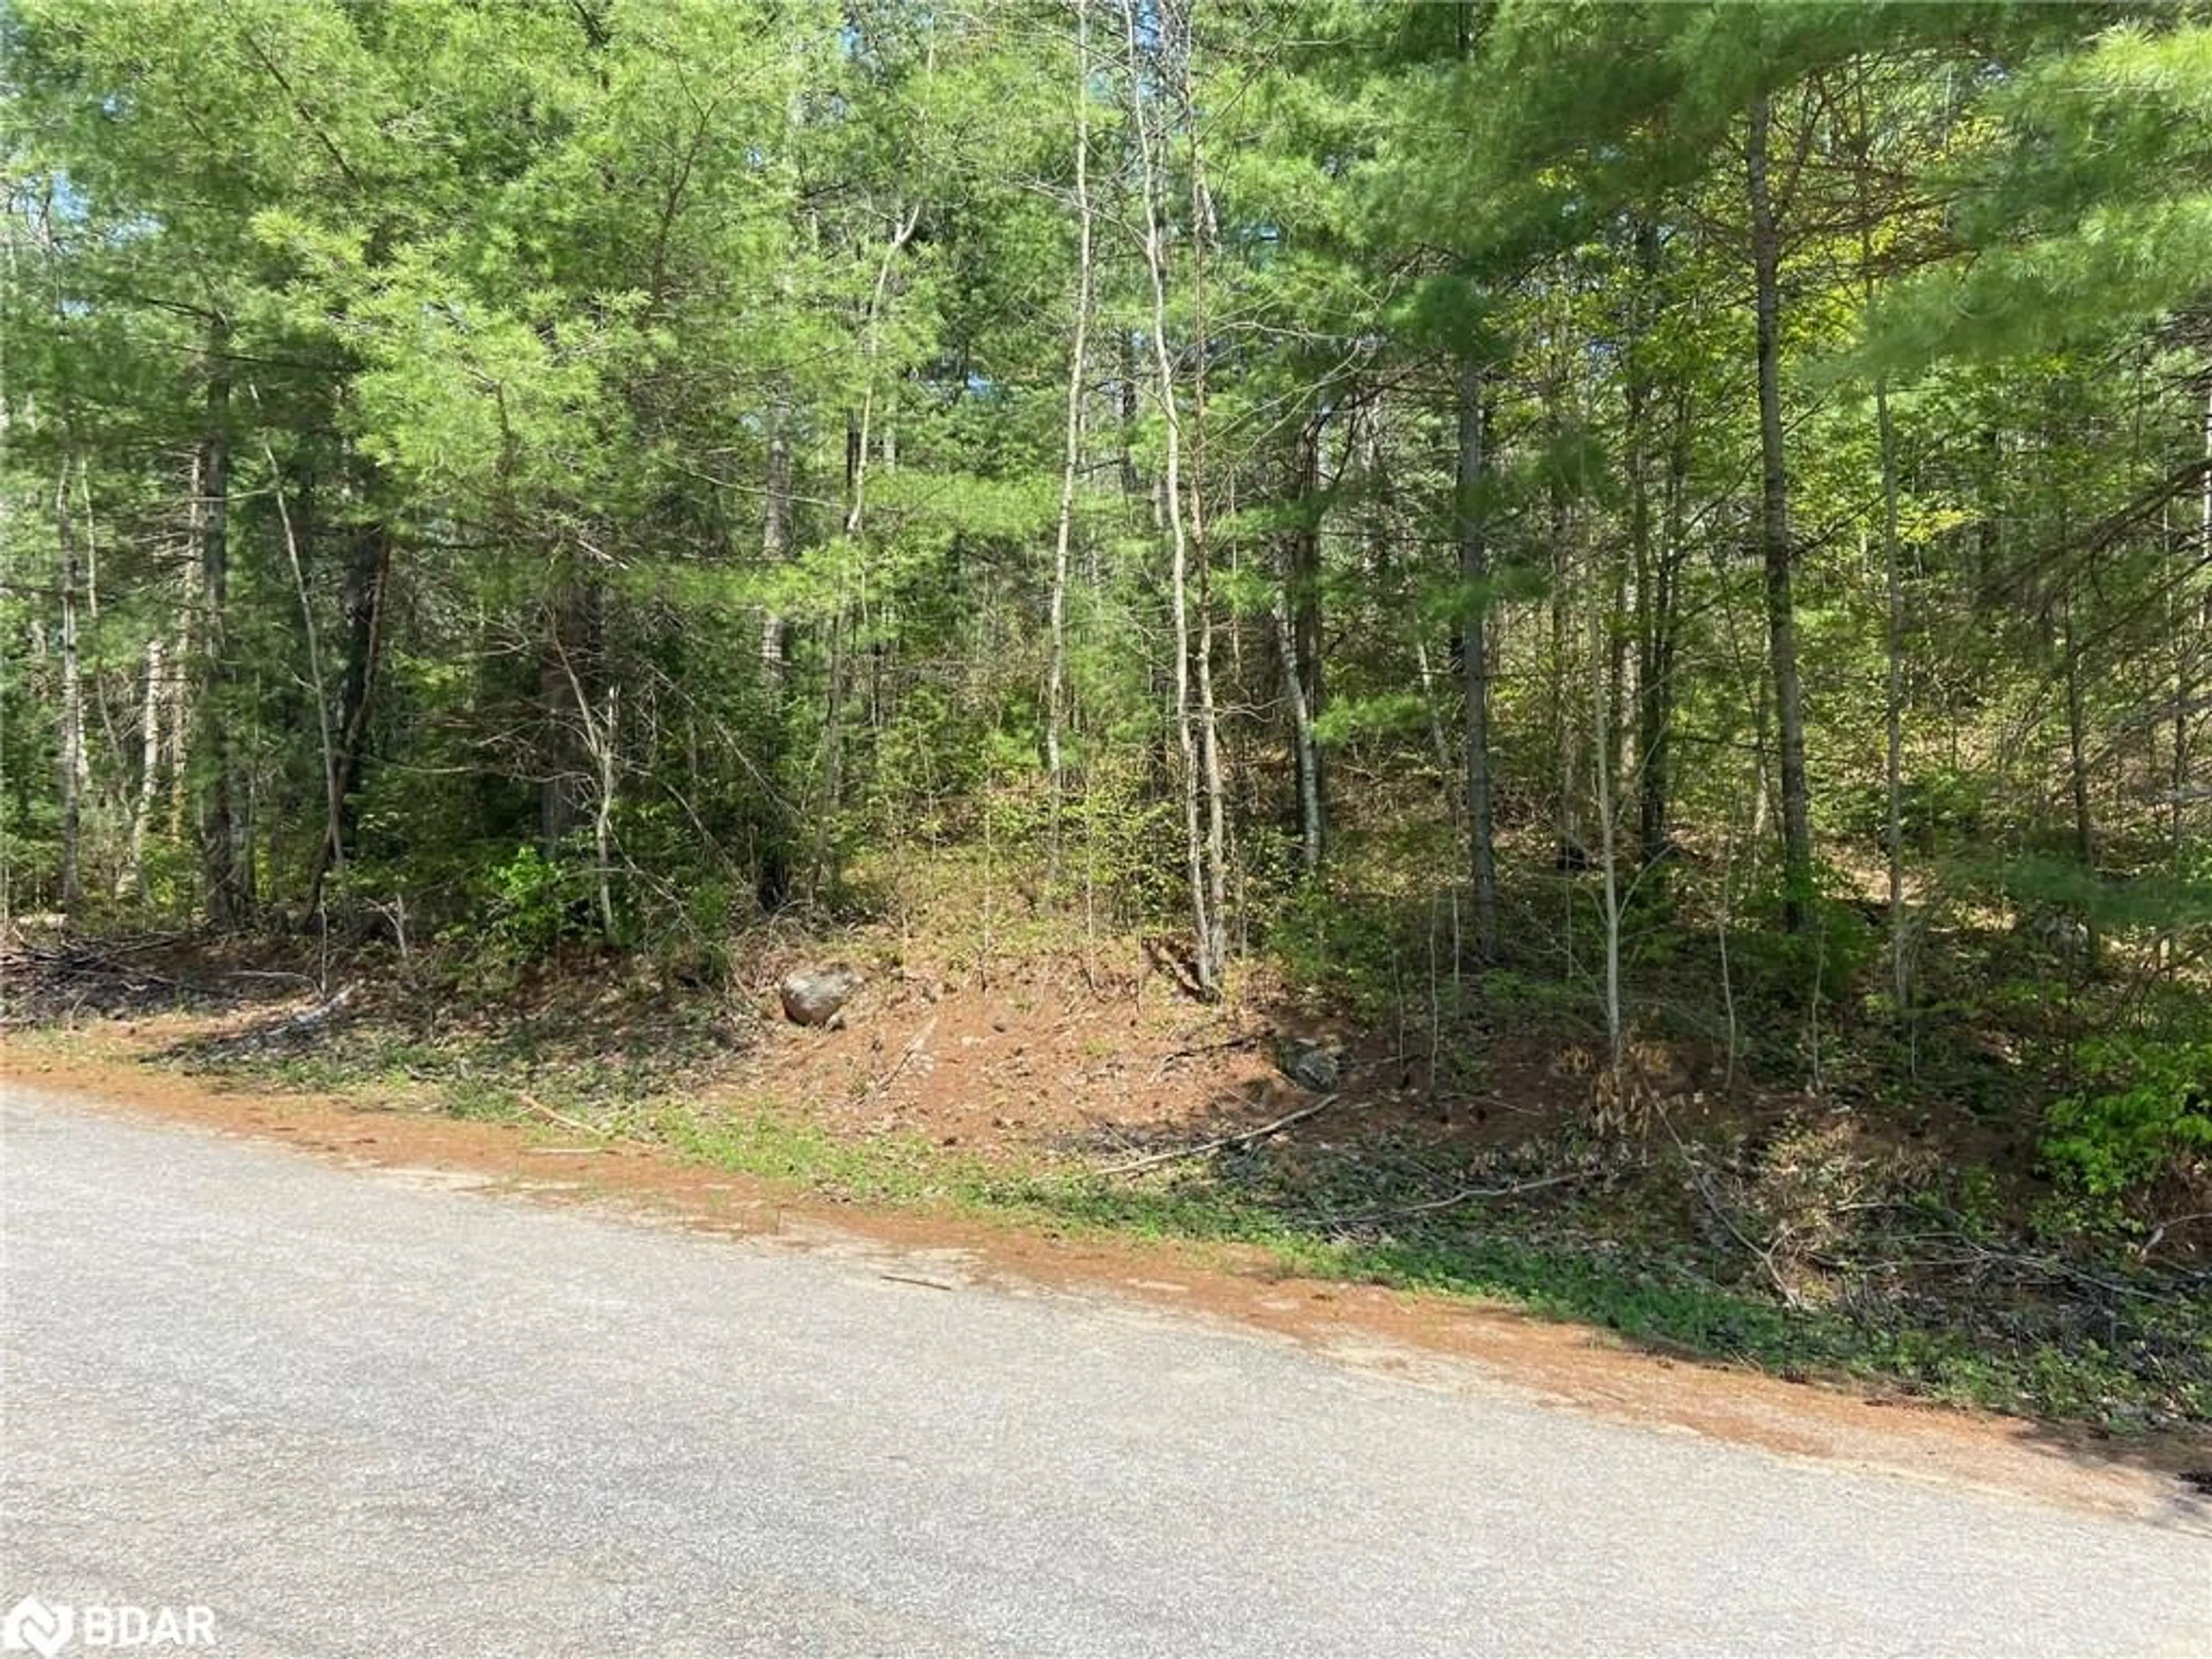 Forest view for N/A Boulter Lake Rd, Hastings Highlands Ontario K0L 2K0